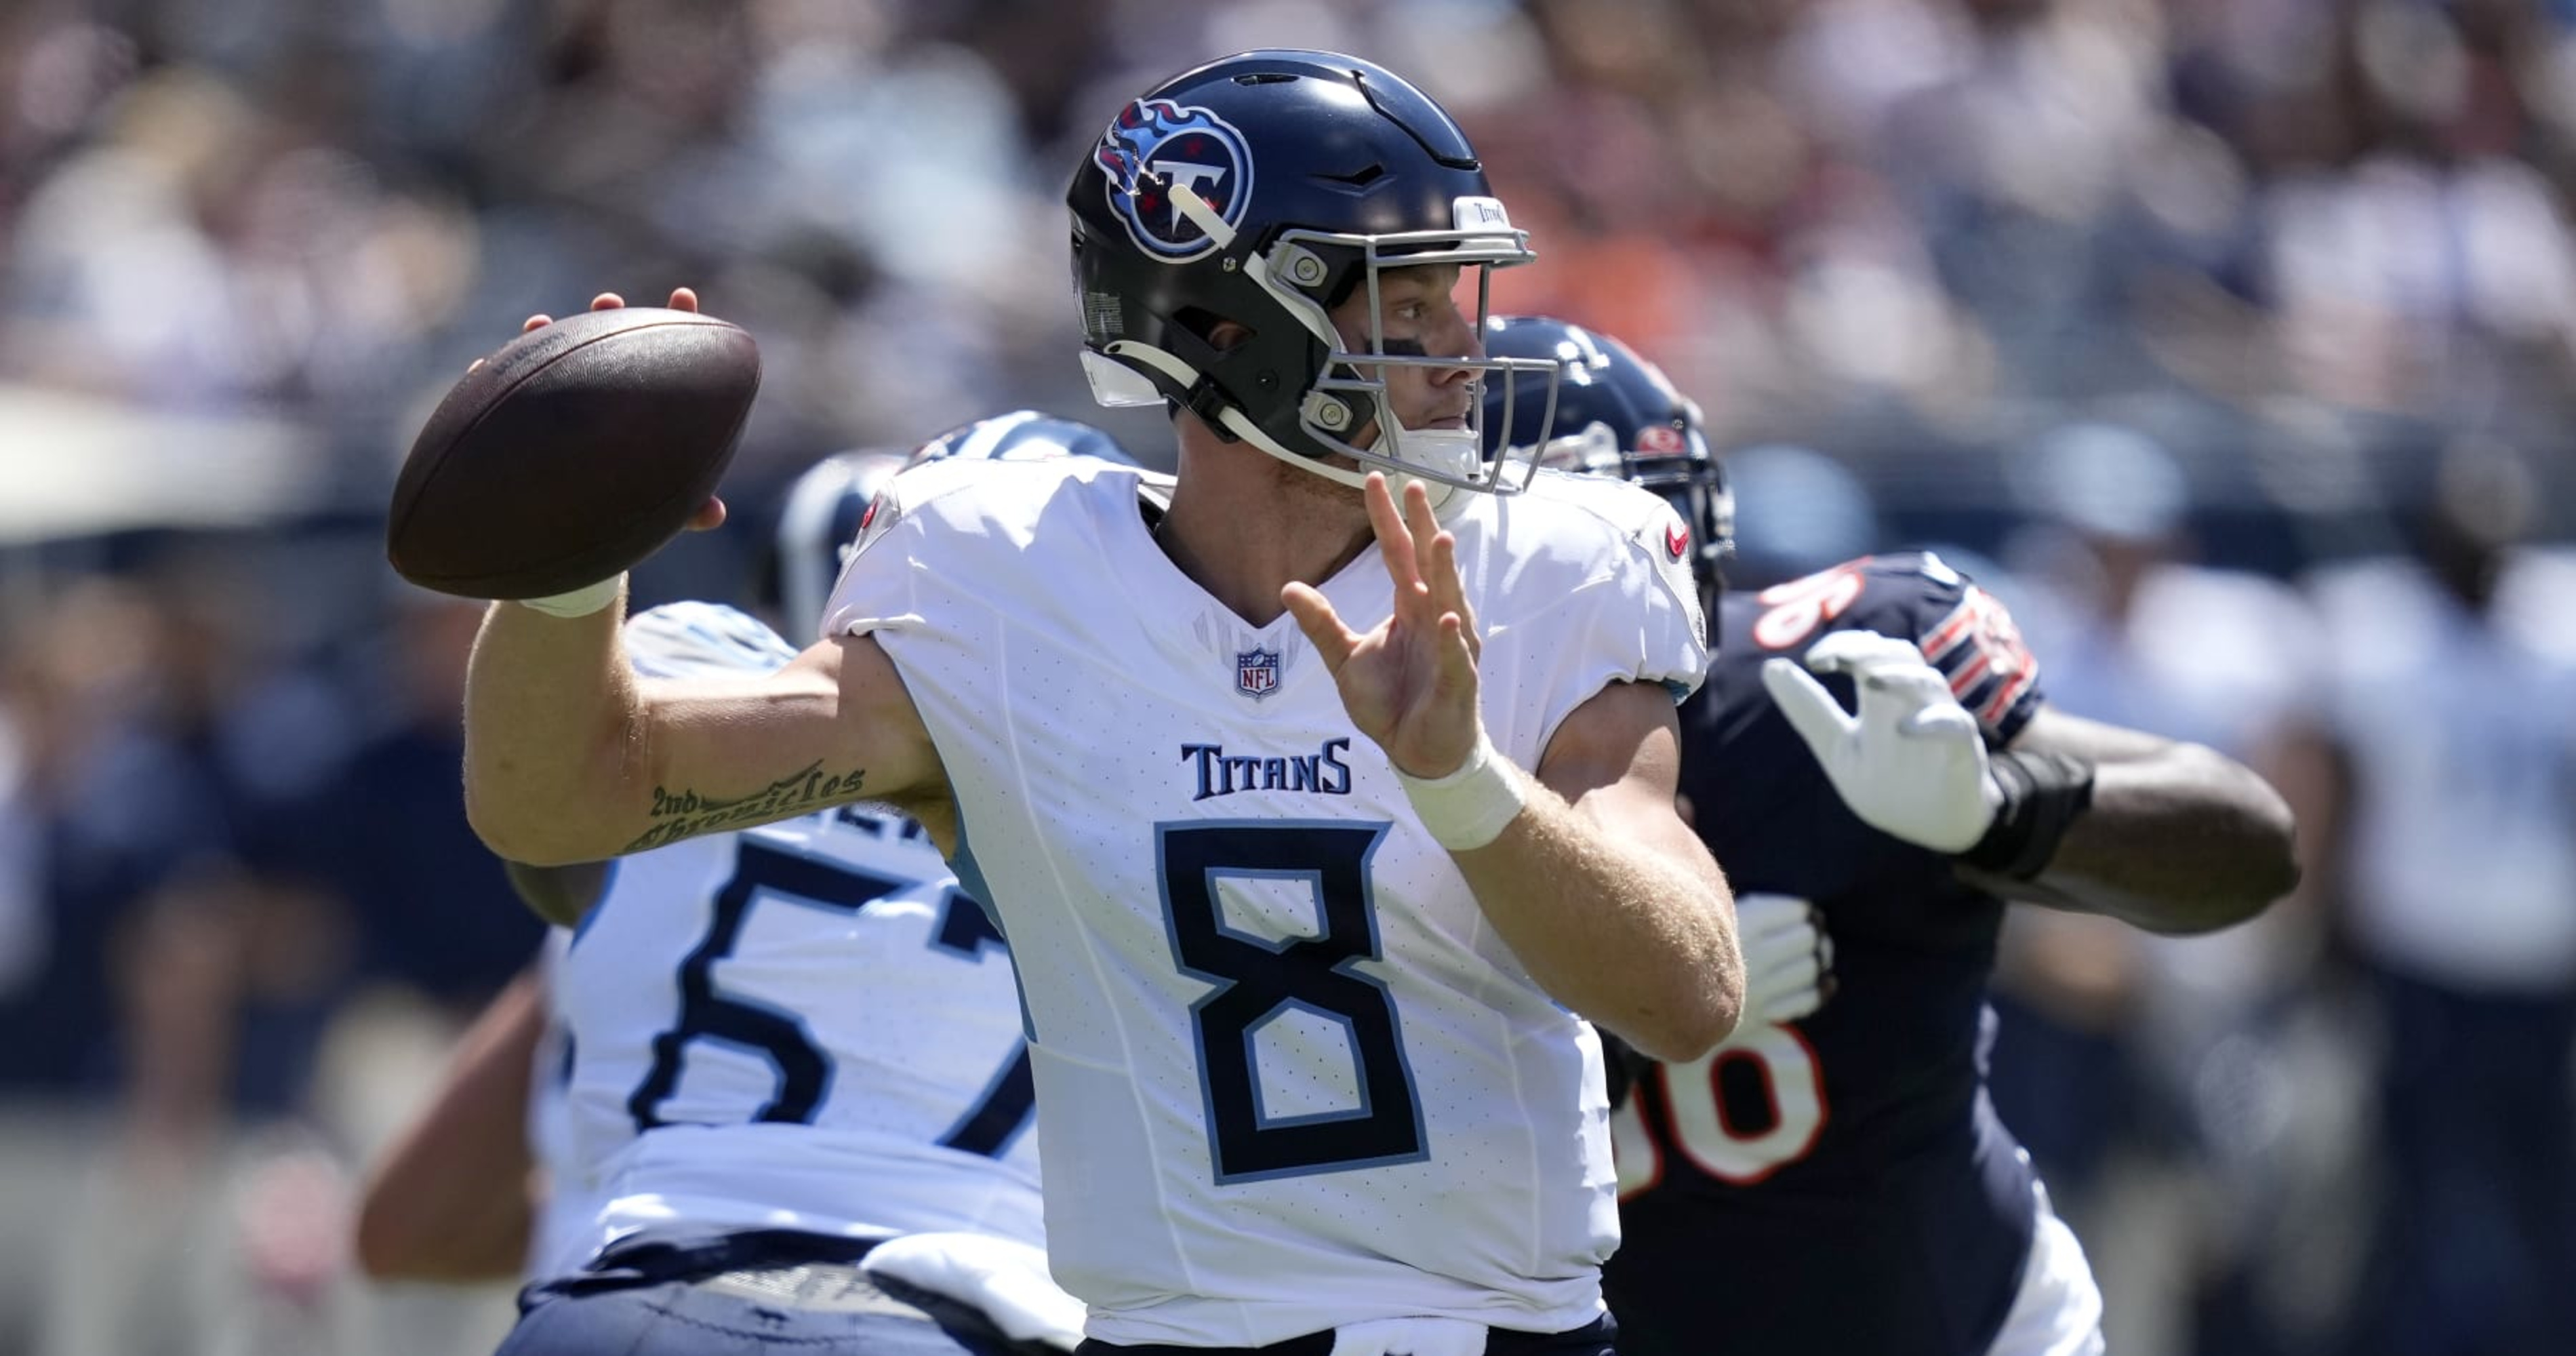 How much should Bears starters play vs. Titans tomorrow?